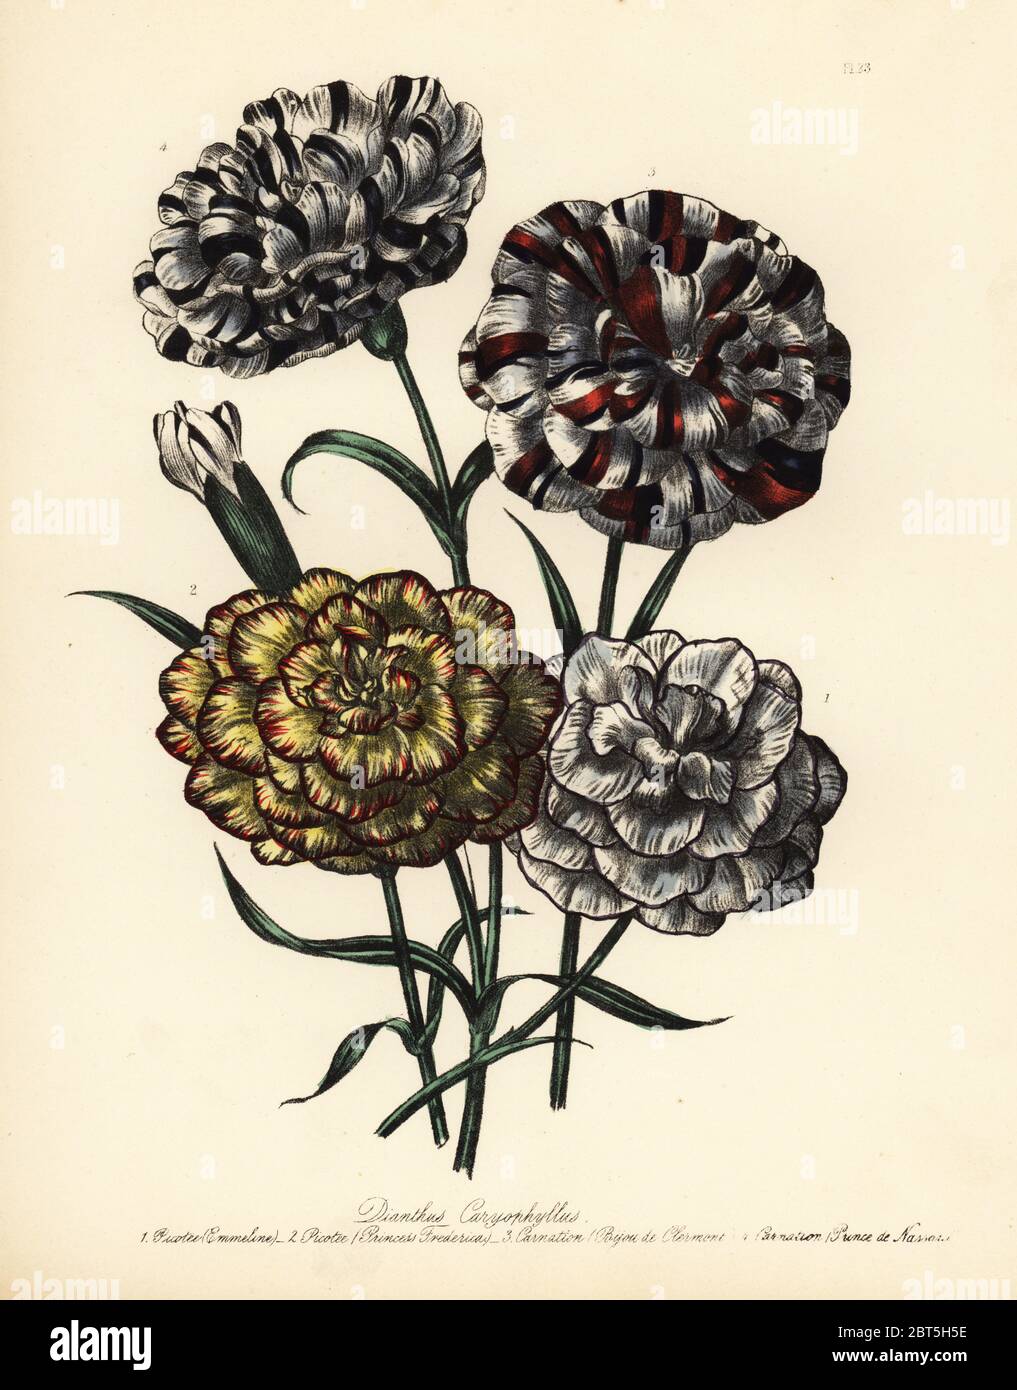 Emmeline and Princess Frederick picotees, and Bijou de Clement and Prince de Nassau carnations, Dianthus caryophyllus. Handfinished chromolithograph by Henry Noel Humphreys after an illustration by Jane Loudon from Mrs. Jane Loudon's Ladies Flower Garden of Ornamental Perennials, William S. Orr, London, 1849. Stock Photo